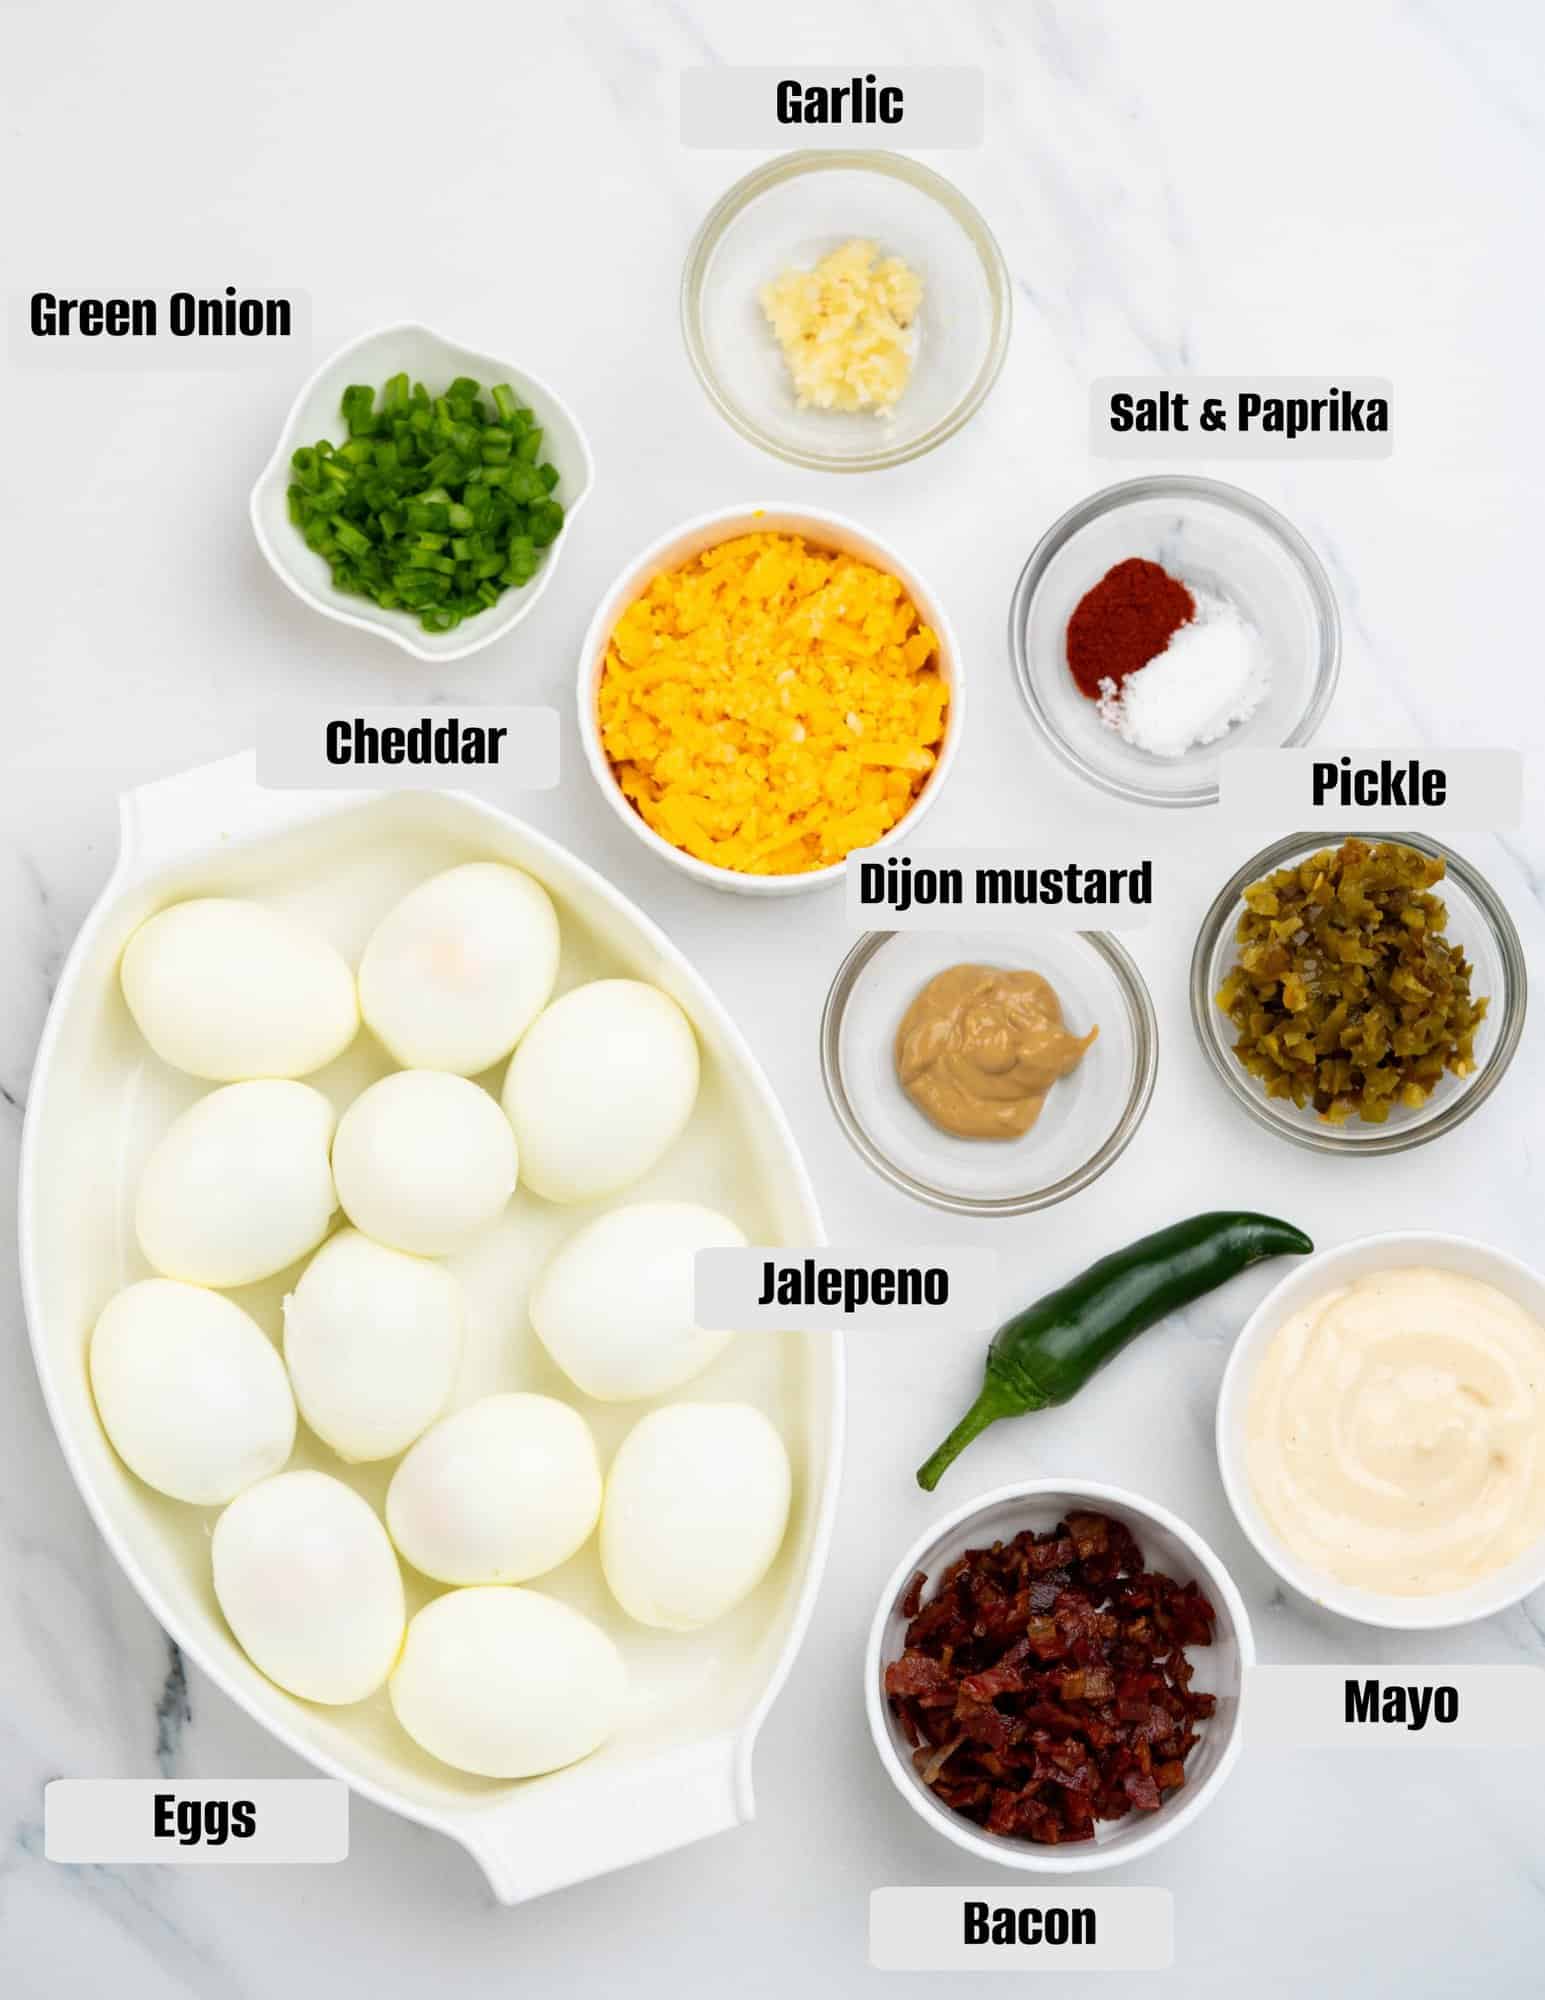 Ingredients images shows all the ingredients measured and shown to make jalapeno deviled eggs.